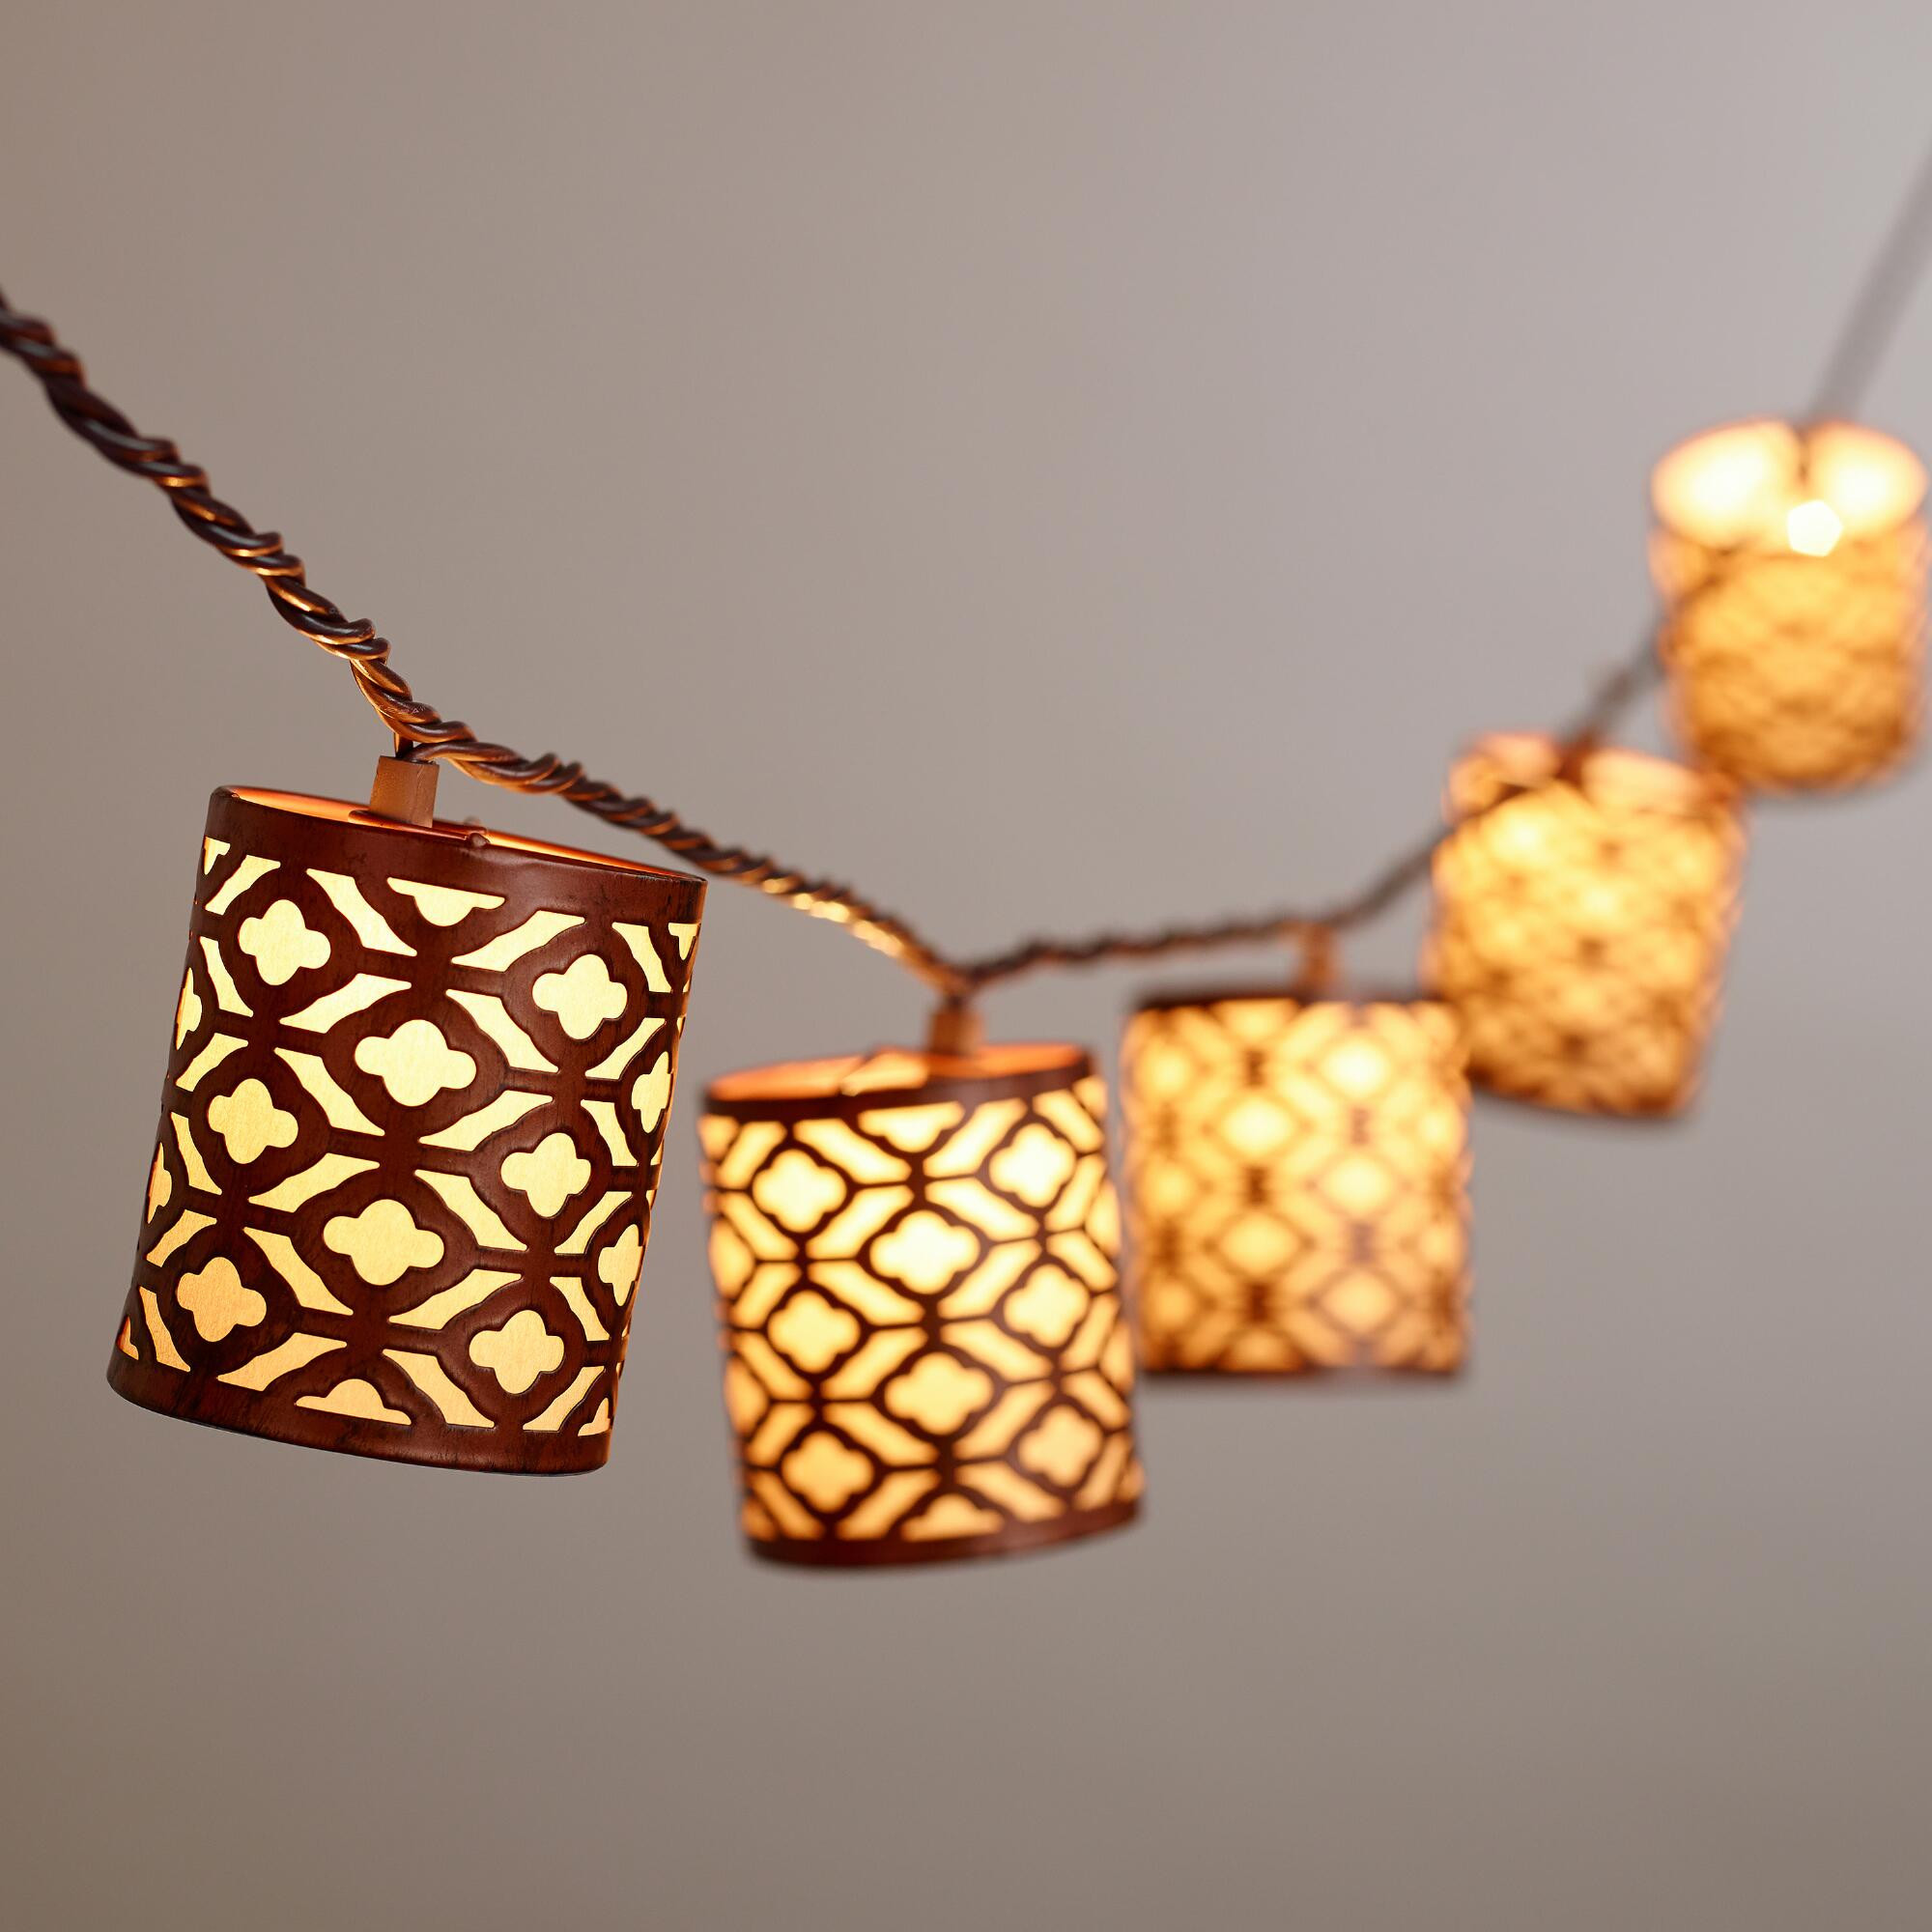 Best ideas about World Market Lighting
. Save or Pin Metal Lattice 10 Bulb String Lights Now.